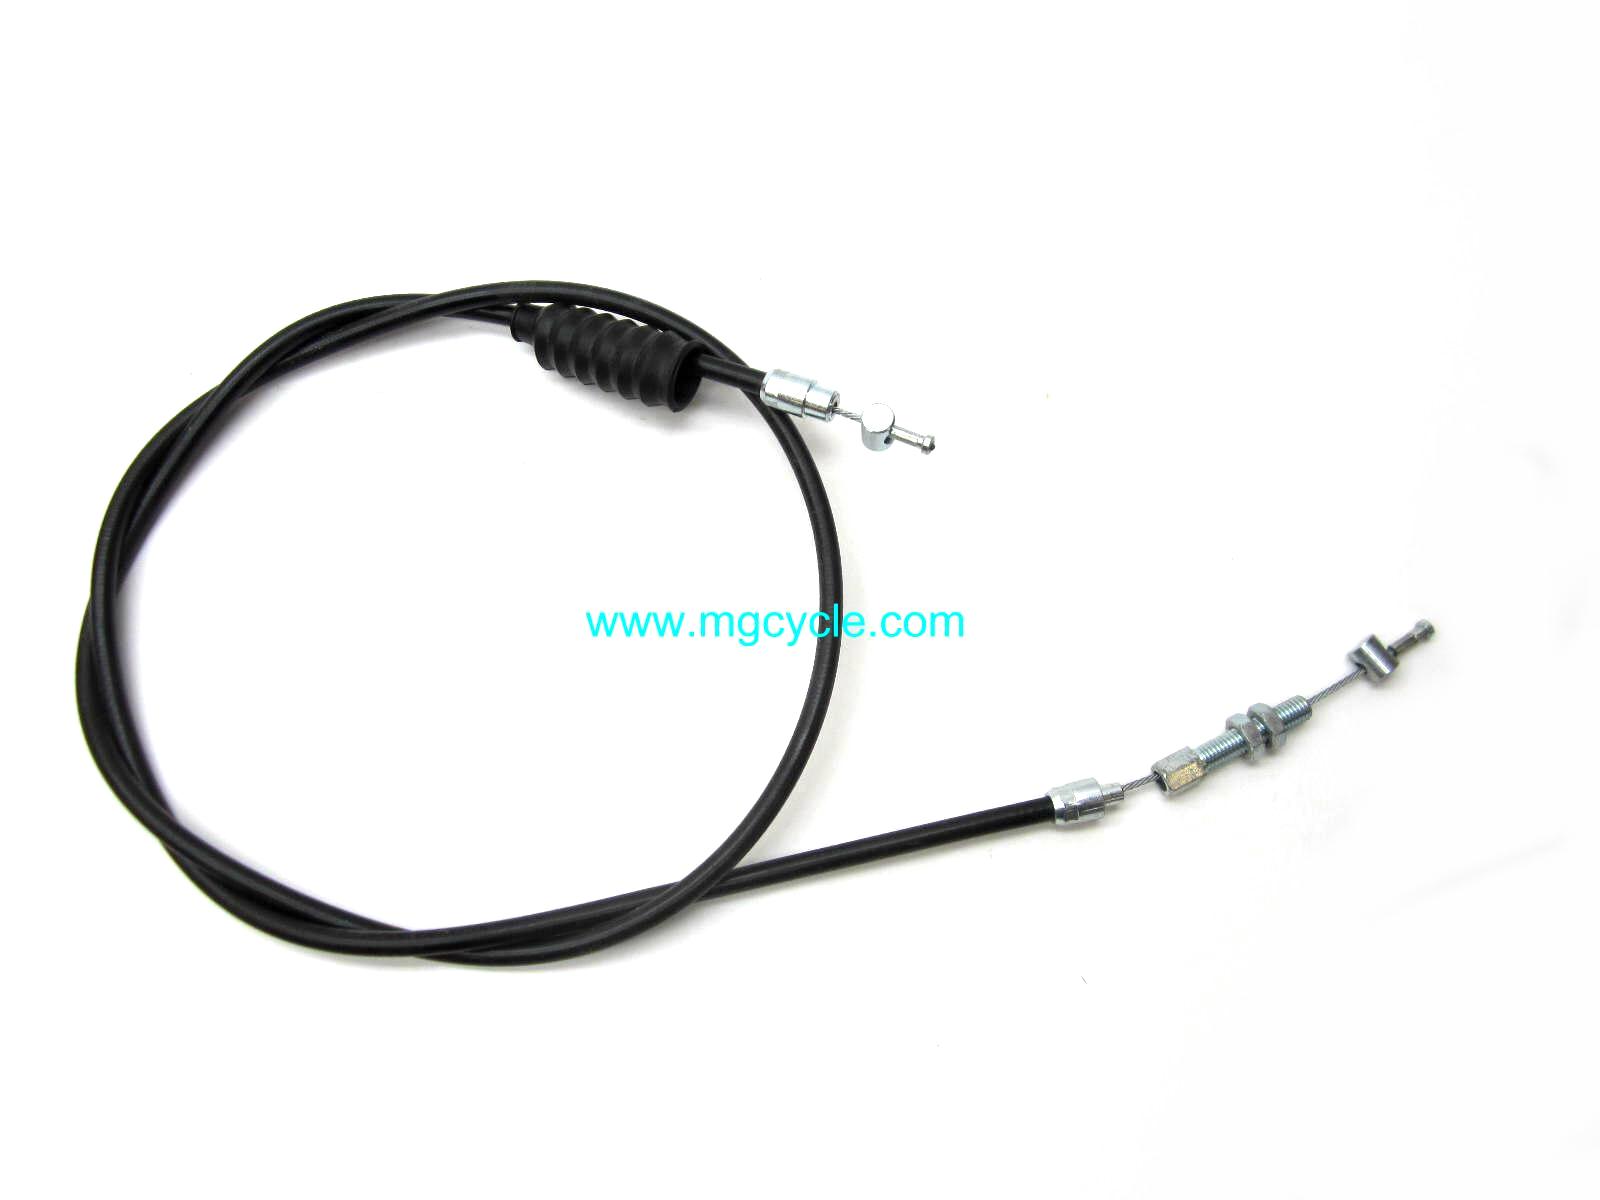 Clutch cable, T5 3rd series 1983-88, Mille GT 87-91 - Click Image to Close